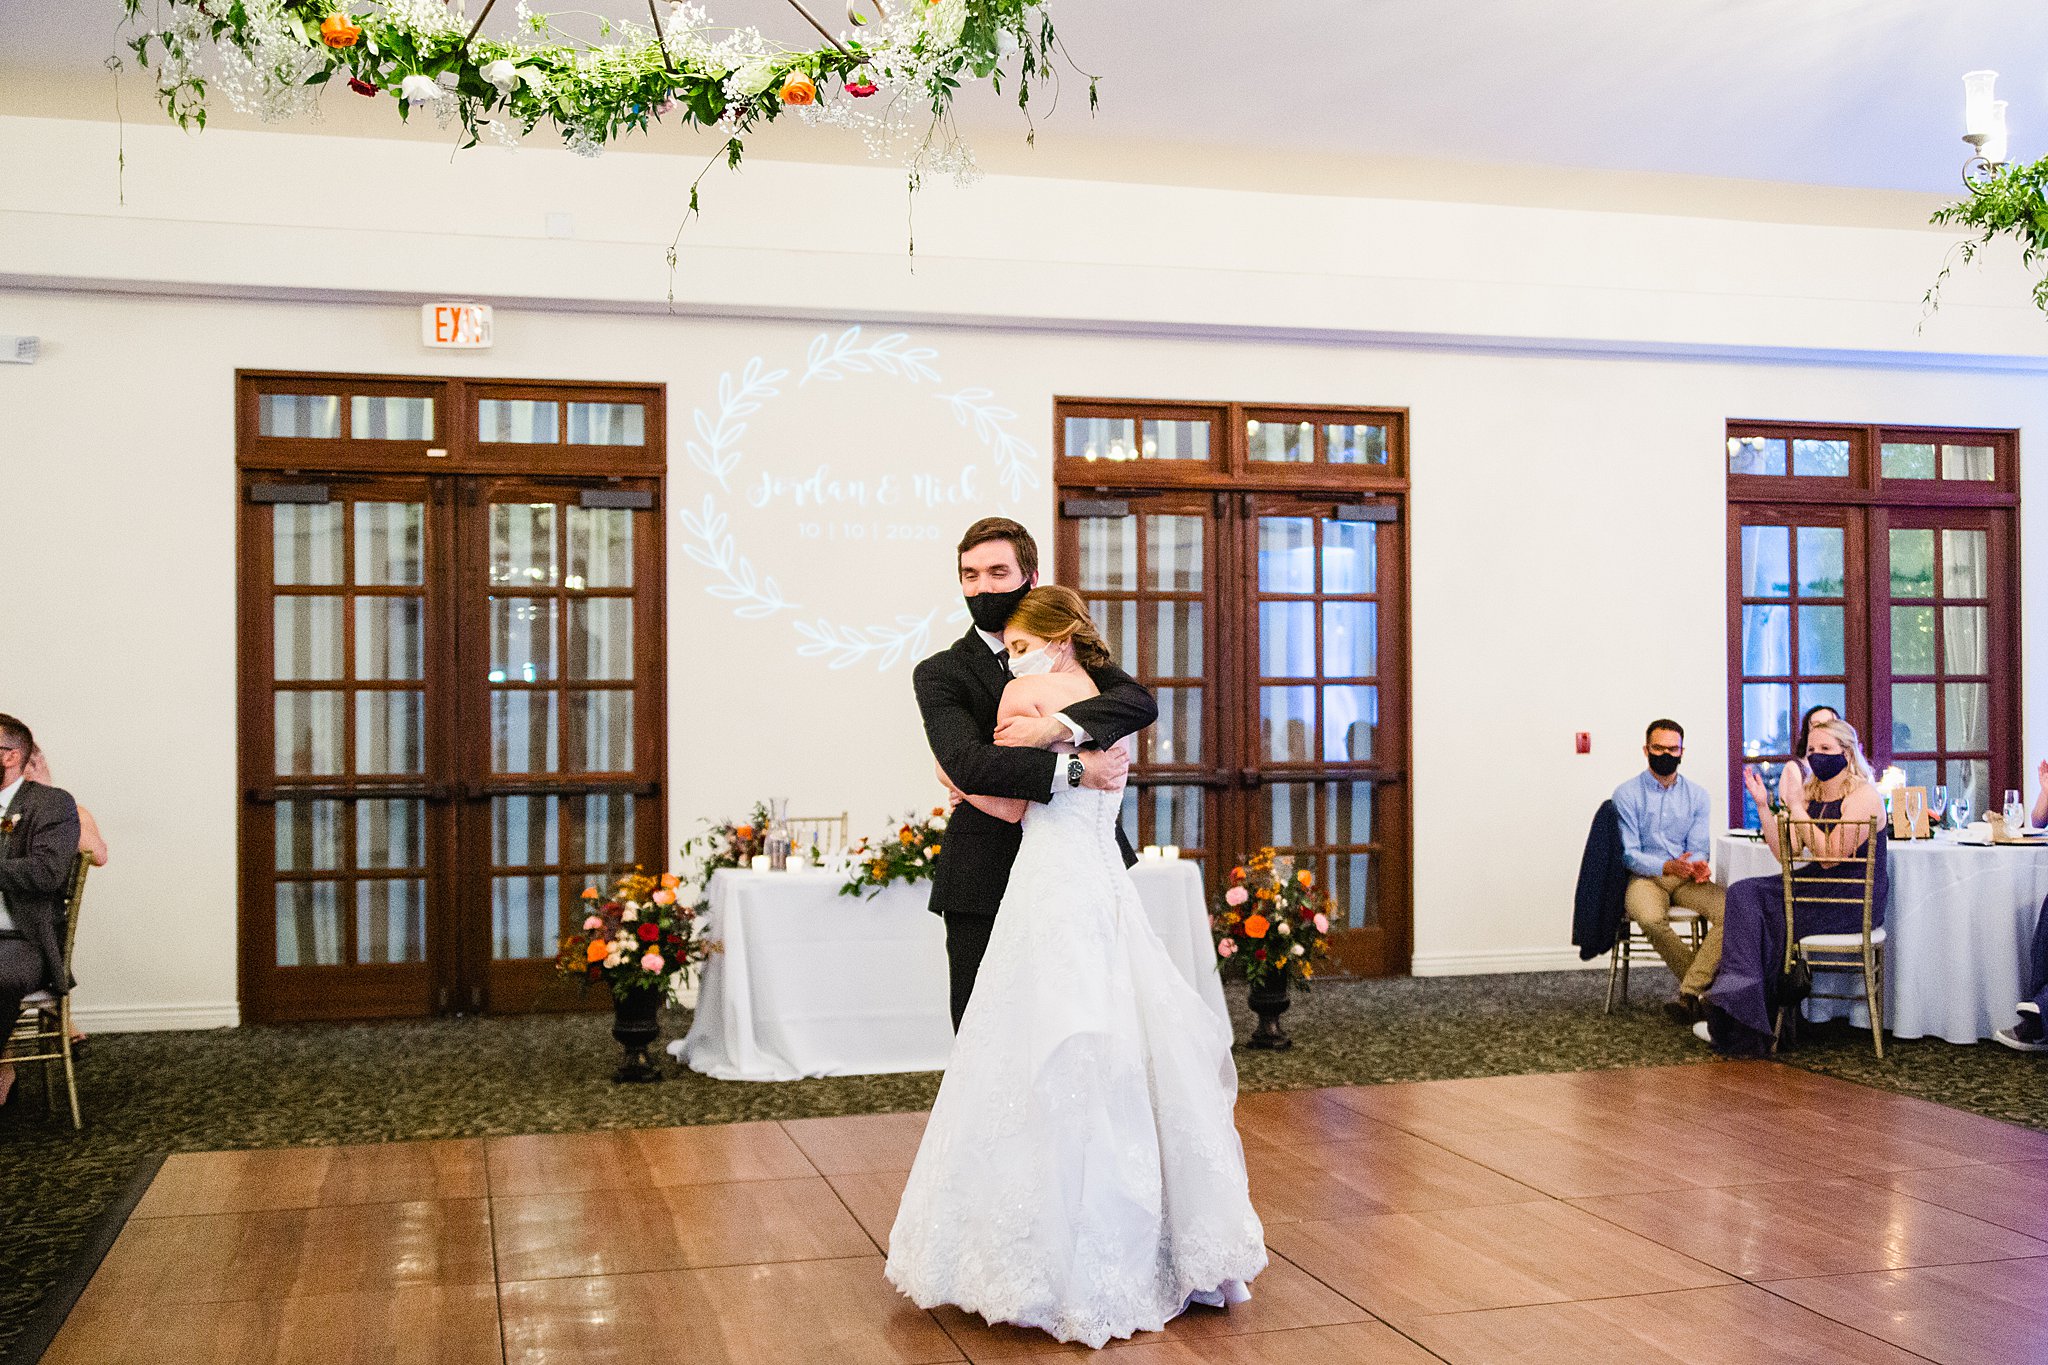 Bride and Groom sharing first dance at their Secret Garden Events wedding reception by Arizona wedding photographer PMA Photography.